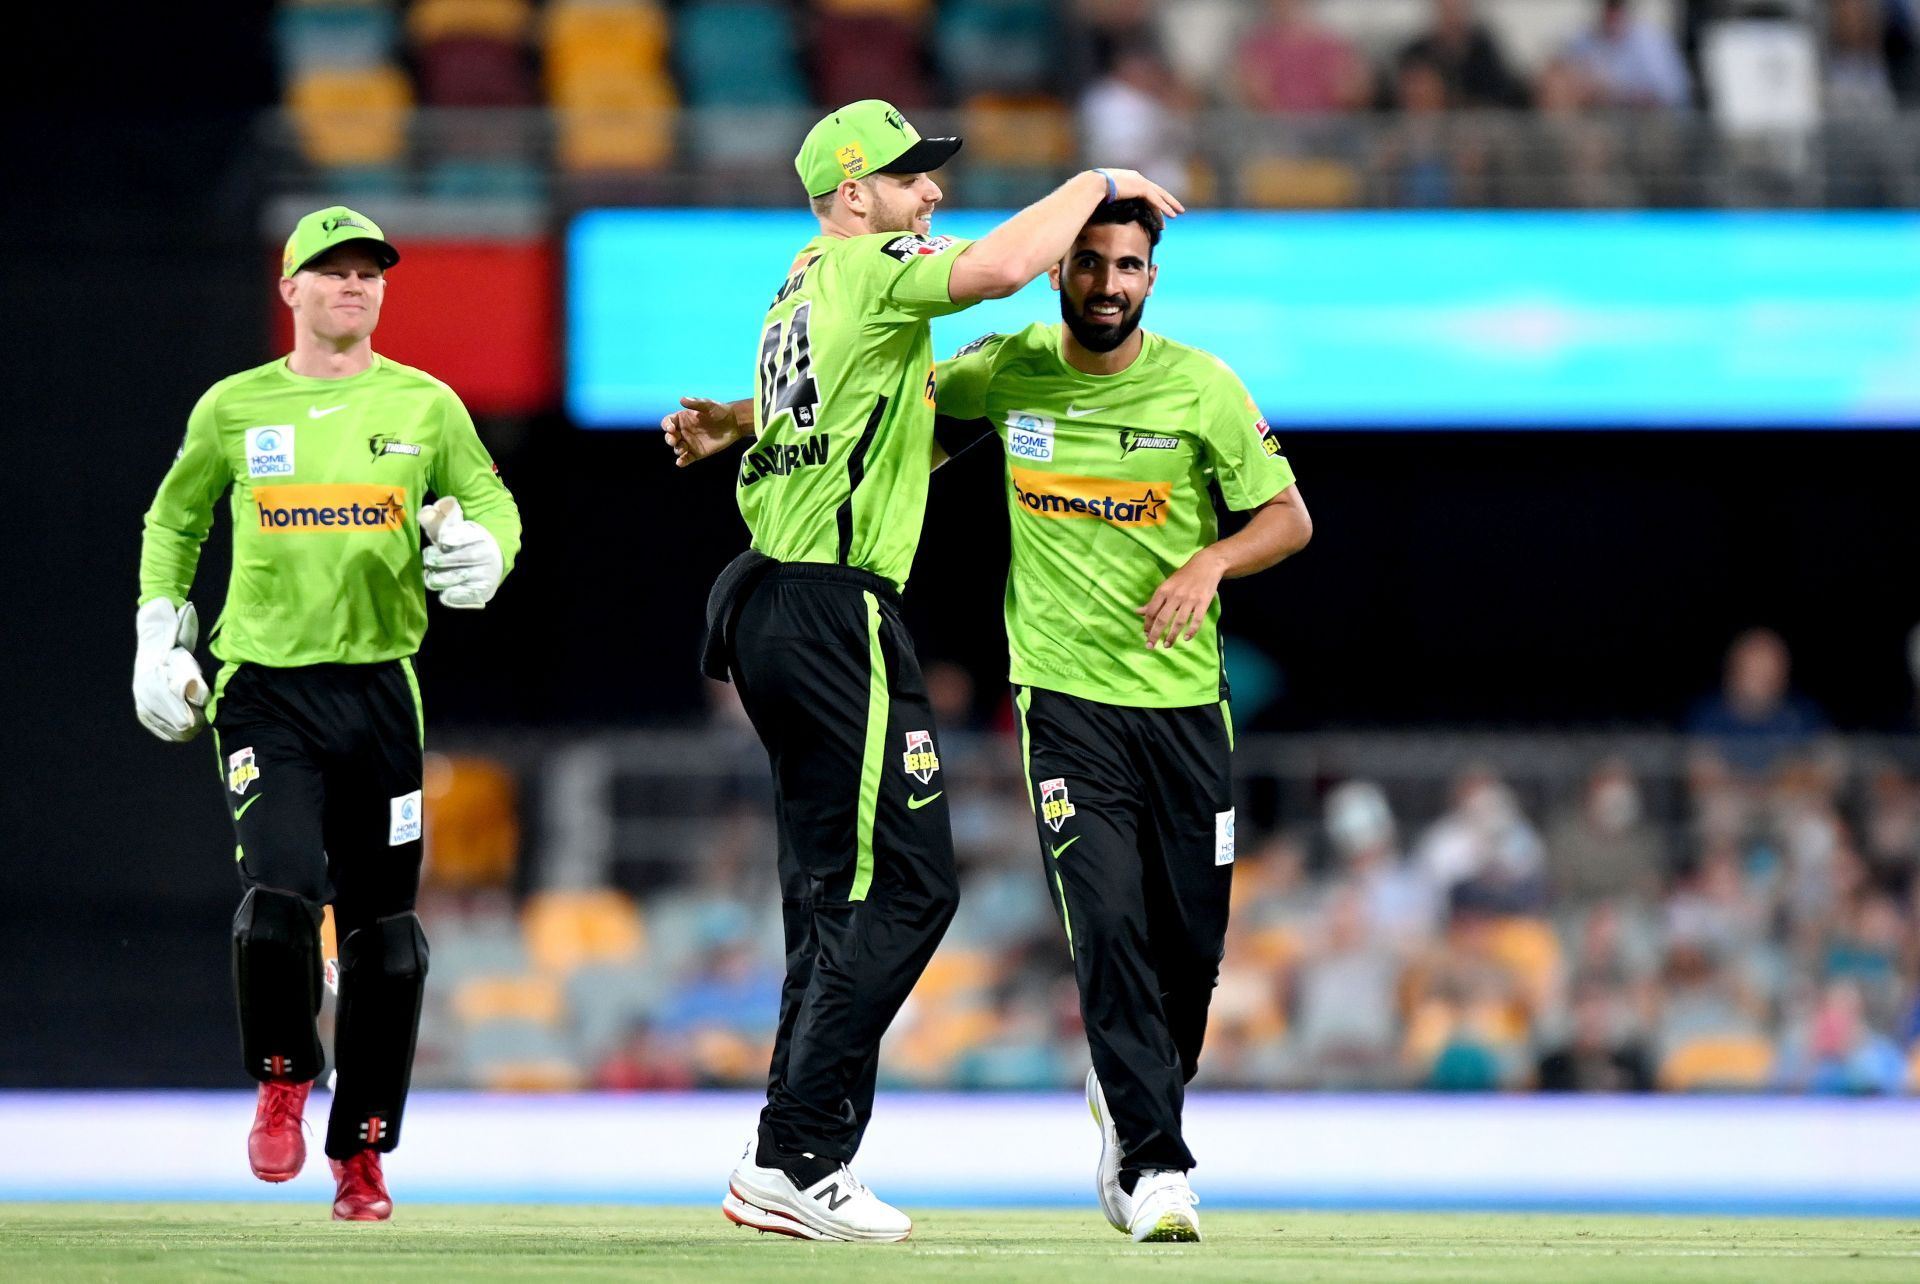 Saqib Mahmood (right) and Sam Billings (left) have been in scintillating form for Sydney Thunder in the ongoing BBL season.